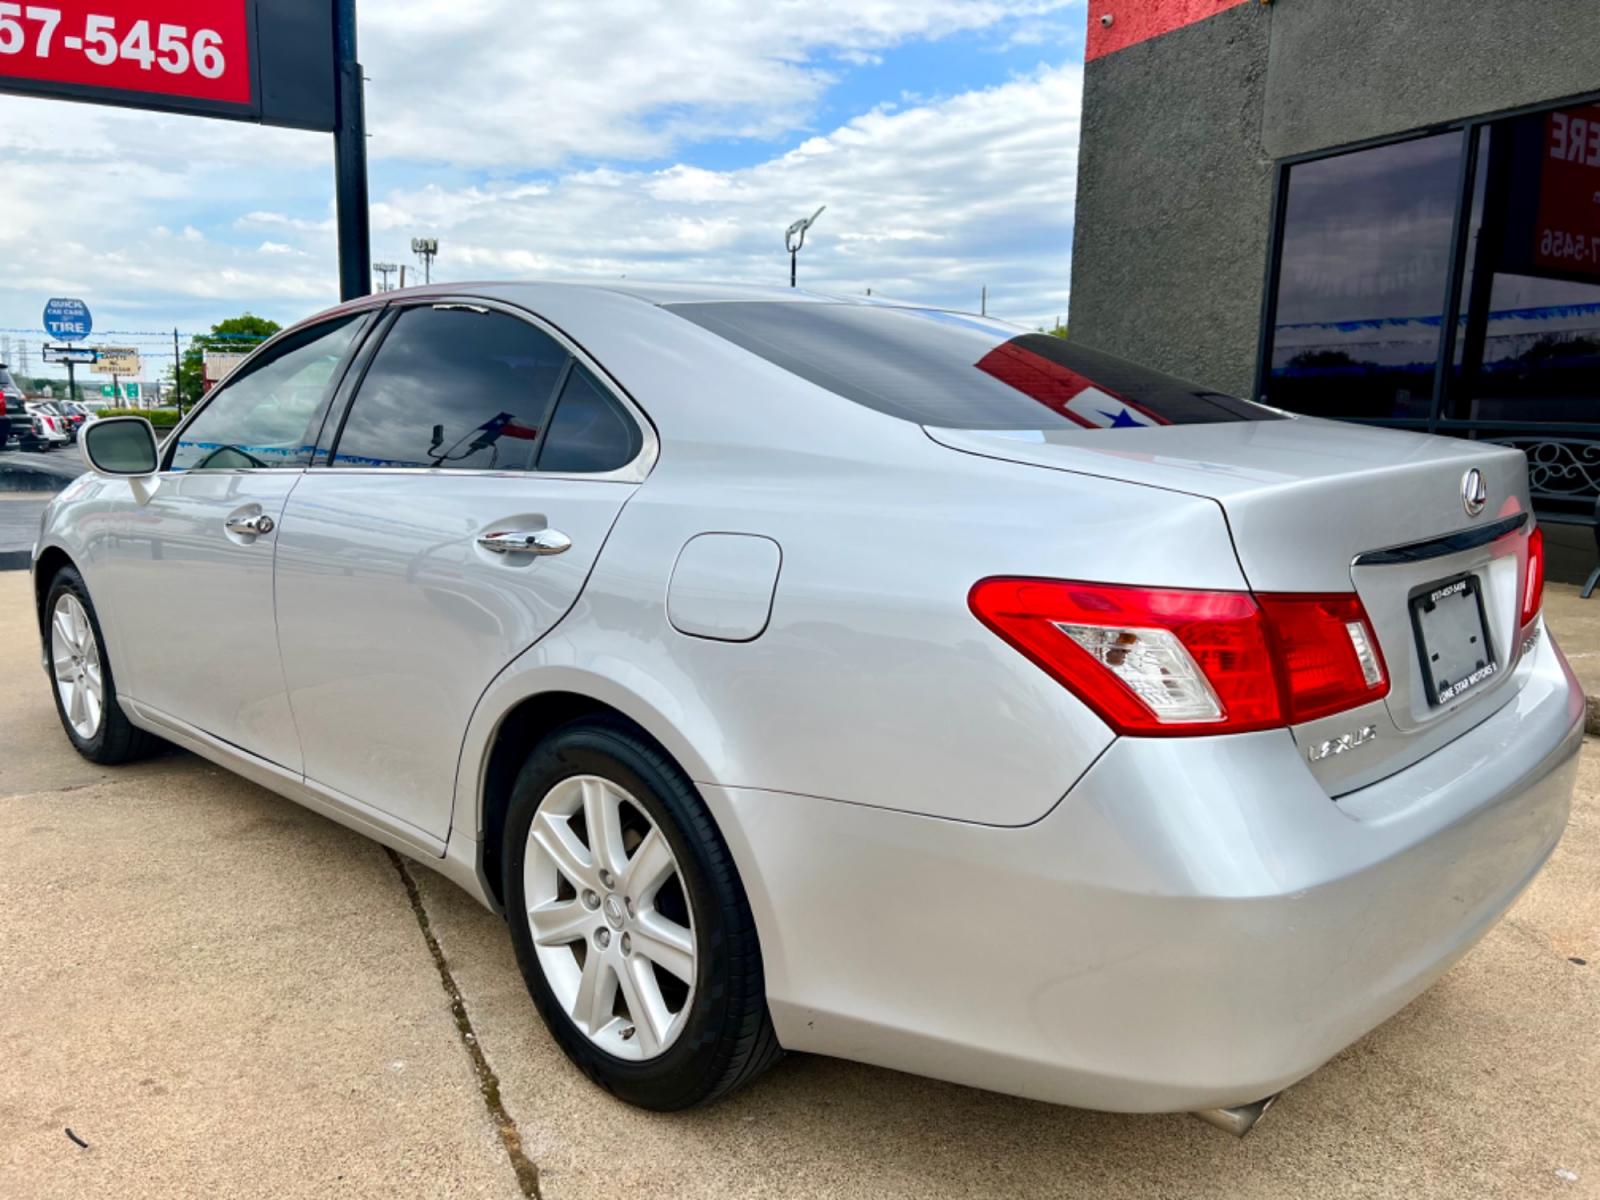 2007 SILVER LEXUS ES 350 BASE (JTHBJ46G072) , located at 5900 E. Lancaster Ave., Fort Worth, TX, 76112, (817) 457-5456, 0.000000, 0.000000 - CASH CAR ONLY, NO FINANCING AVAILABLE. WE'VE SLASHED THE PRICE! NOW ONLY $5,391! THIS 2007 LEXUS ES 350 BASE 4 DOOR SEDAN RUNS AND DRIVES GREAT. IT IS EQUIPPED WITH A CD PLAYER, AM/FM RADIO AND AN AUX PORT. THE TIRES ARE IN GOOD CONDITION AND STILL HAVE TREAD LEFT ON THEM. THIS CAR WILL NOT LAST S - Photo #3